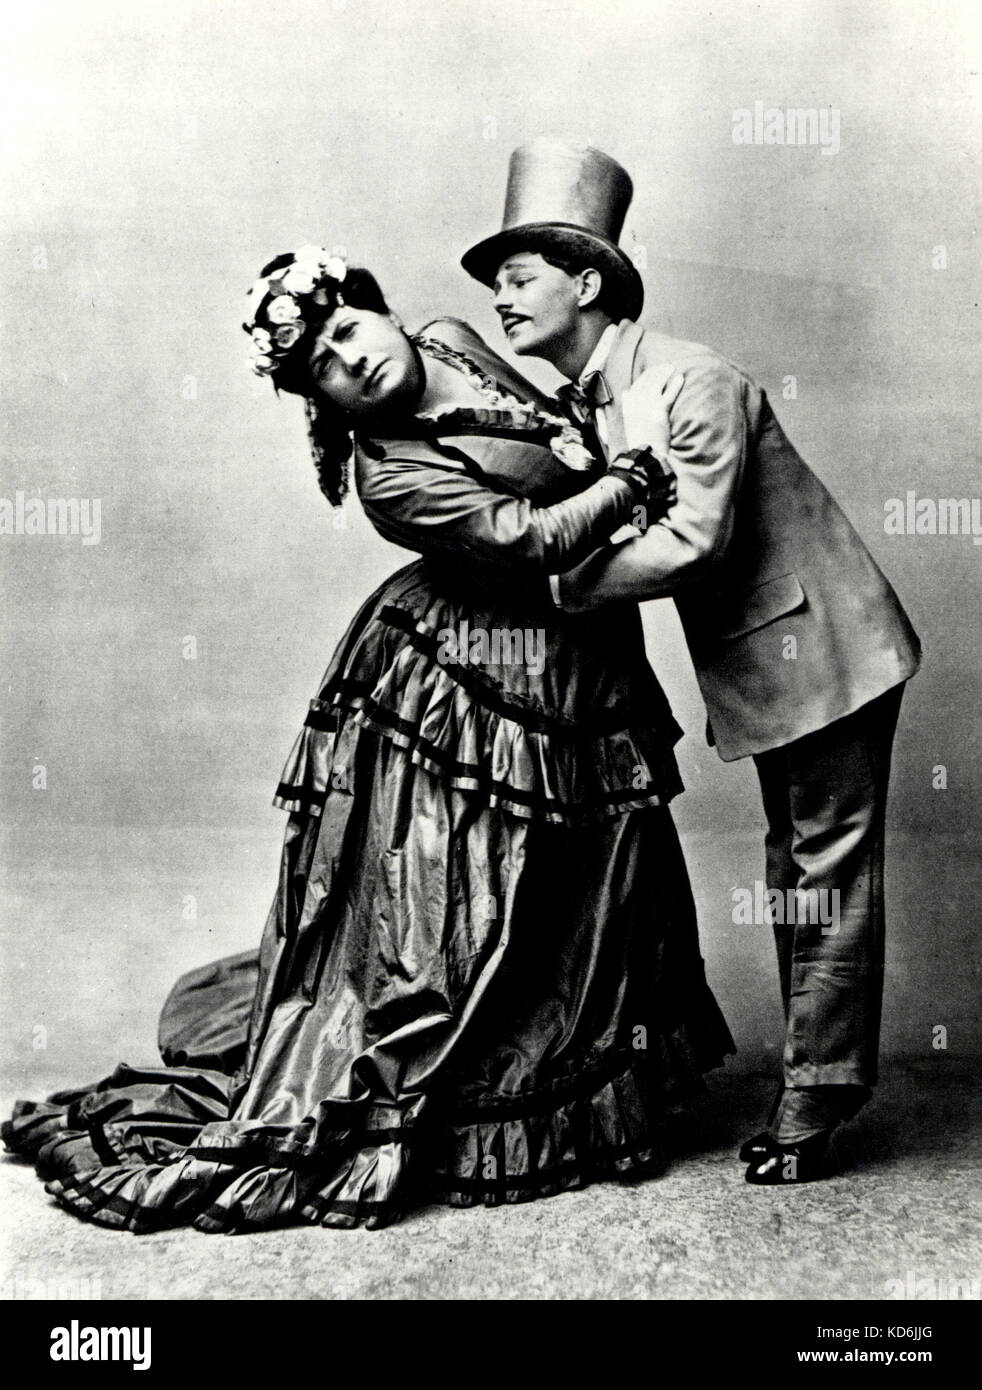 'La Boutique fantastique' ('The Fantastic Toyshop') Scene with the Russian merchant's wife and the Snob, from original 1919 production, at the Alhambra Theatre, London. Music arrangement by Respighi, from several unknown pieces by Rossini. Adapted from 'The Fairy Doll'. Ballets Russes de Diaghilev. Choreography by Massine. . Ballet Russe, Ballets Russes Stock Photo